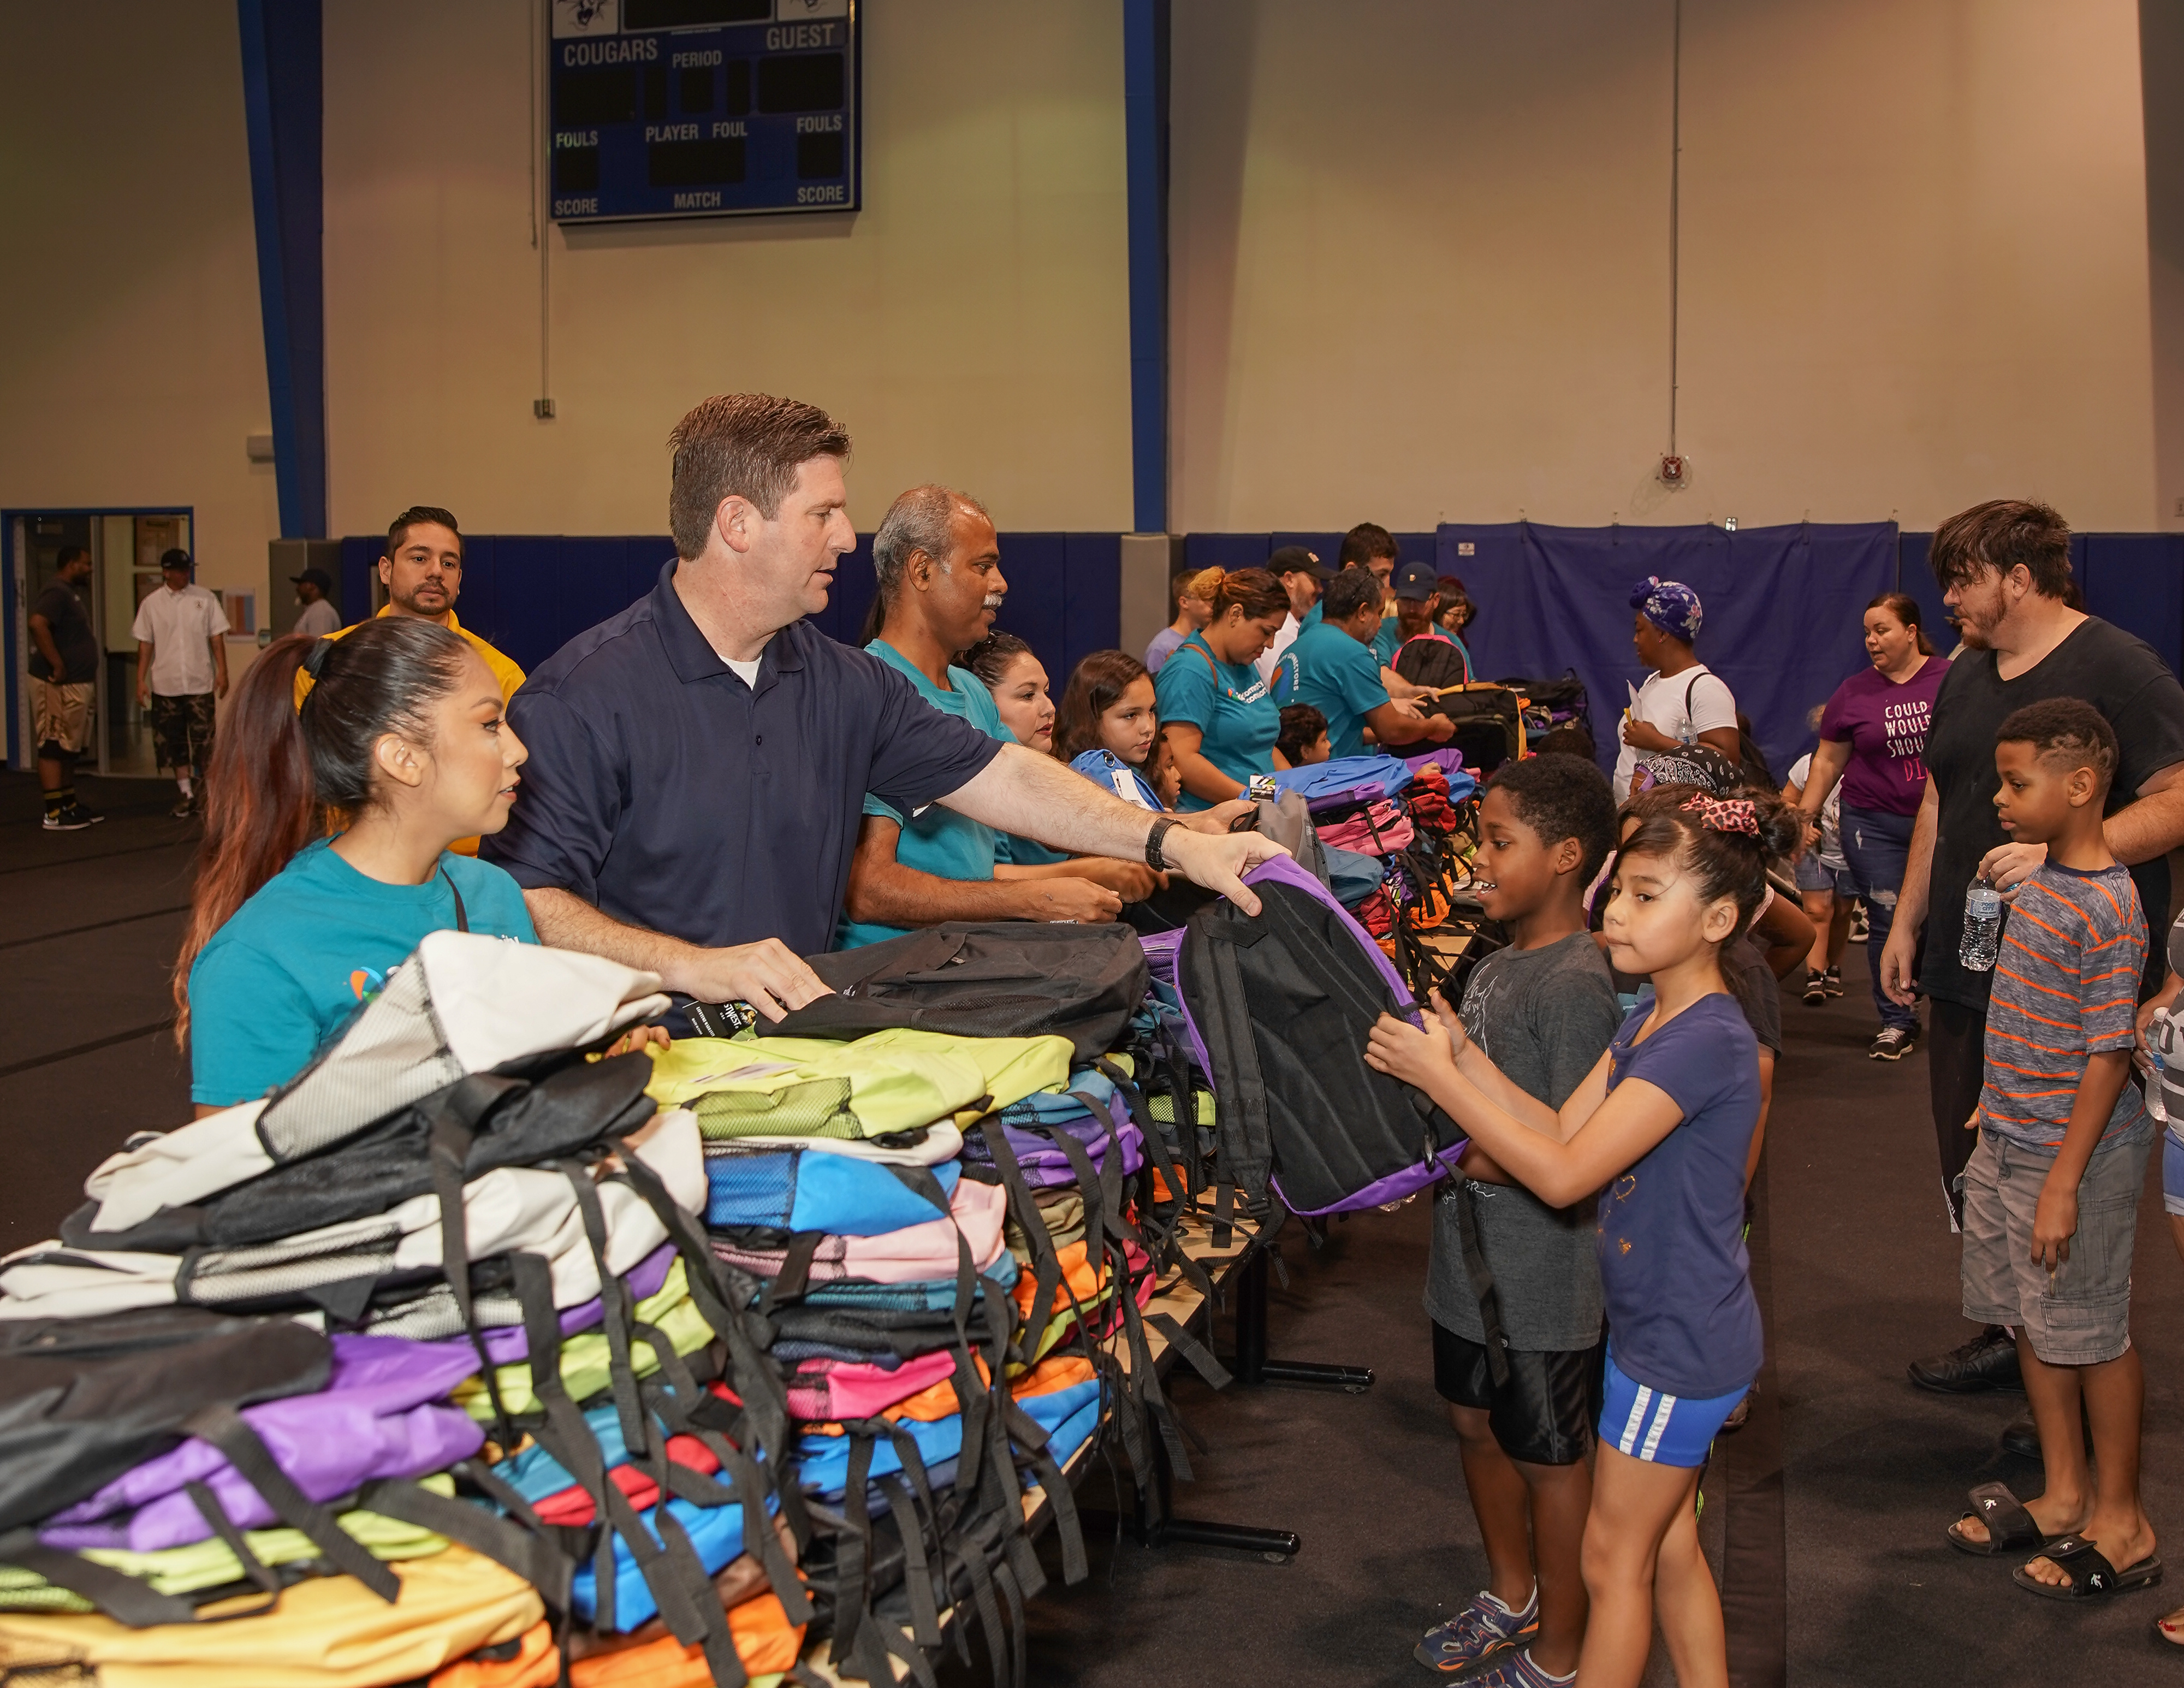 HeroZona is gearing up for its 7th annual back-to-school event. (File photo from 2019 event, courtesy of HeroZona)